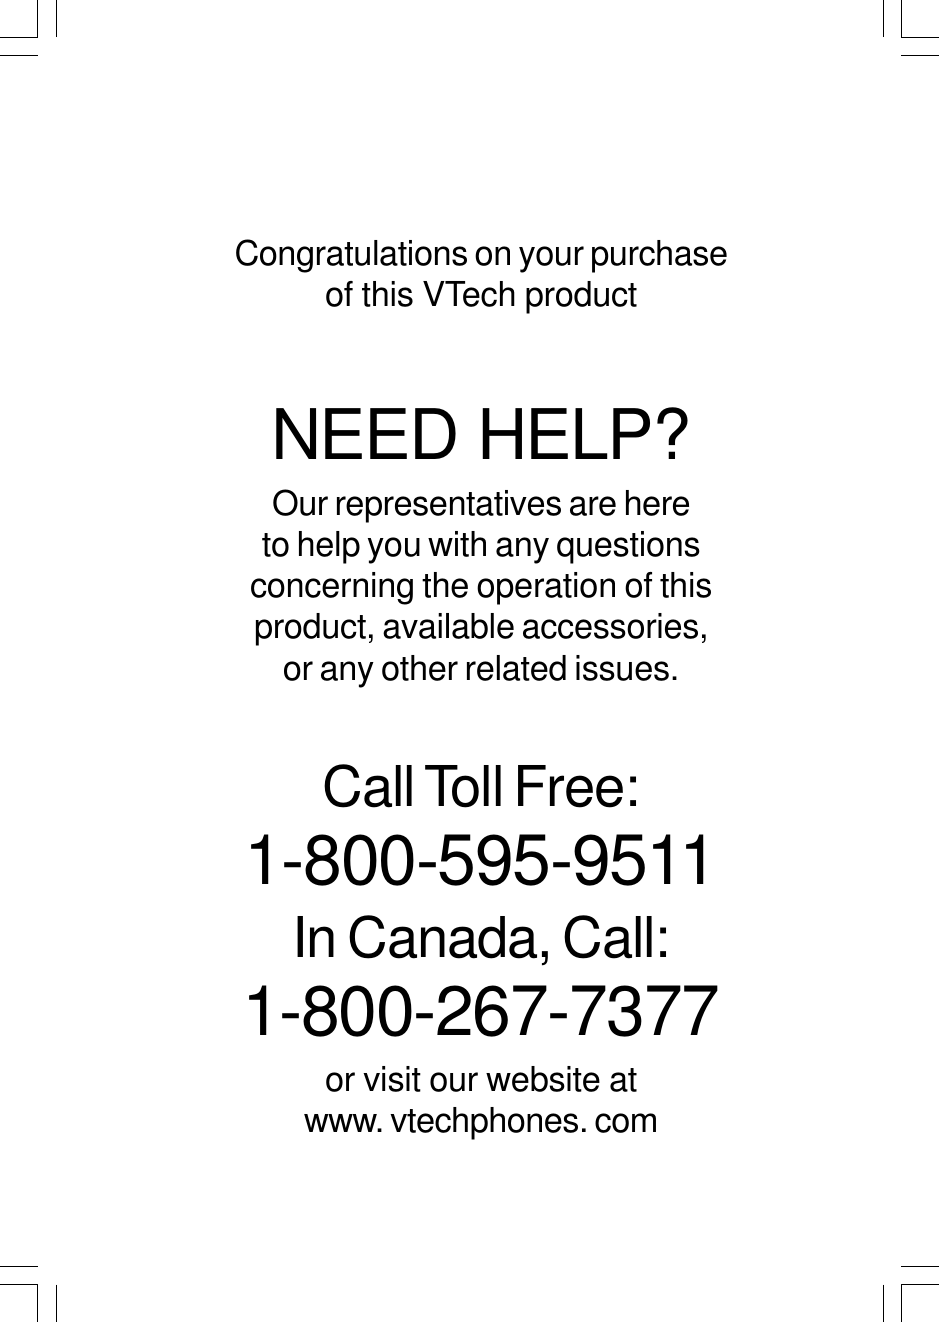 Congratulations on your purchaseof this VTech productNEED HELP?Our representatives are hereto help you with any questionsconcerning the operation of thisproduct, available accessories,or any other related issues.Call Toll Free:1-800-595-9511In Canada, Call:1-800-267-7377or visit our website atwww. vtechphones. com